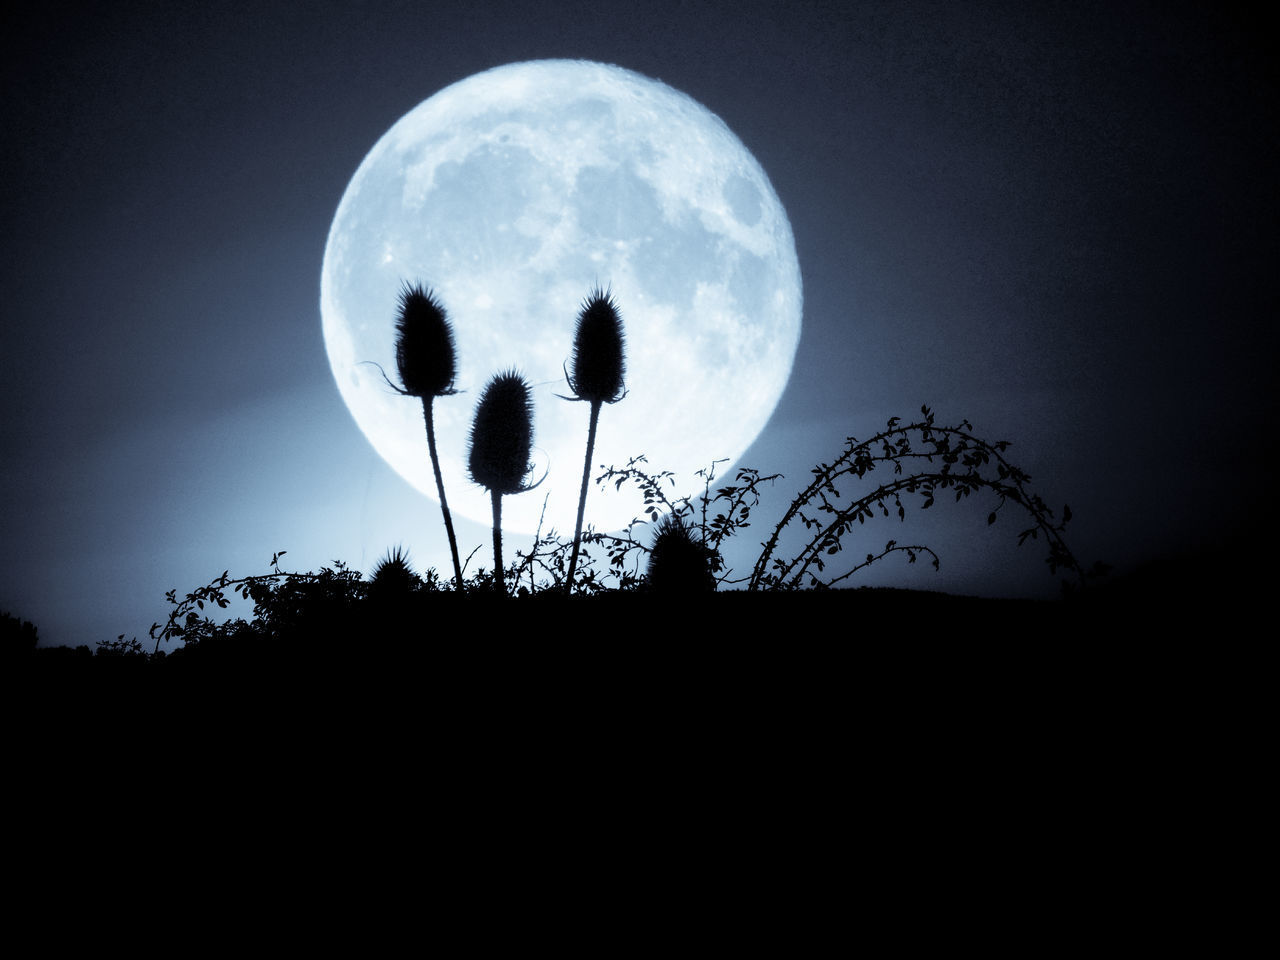 SILHOUETTE OF PLANT AGAINST MOON